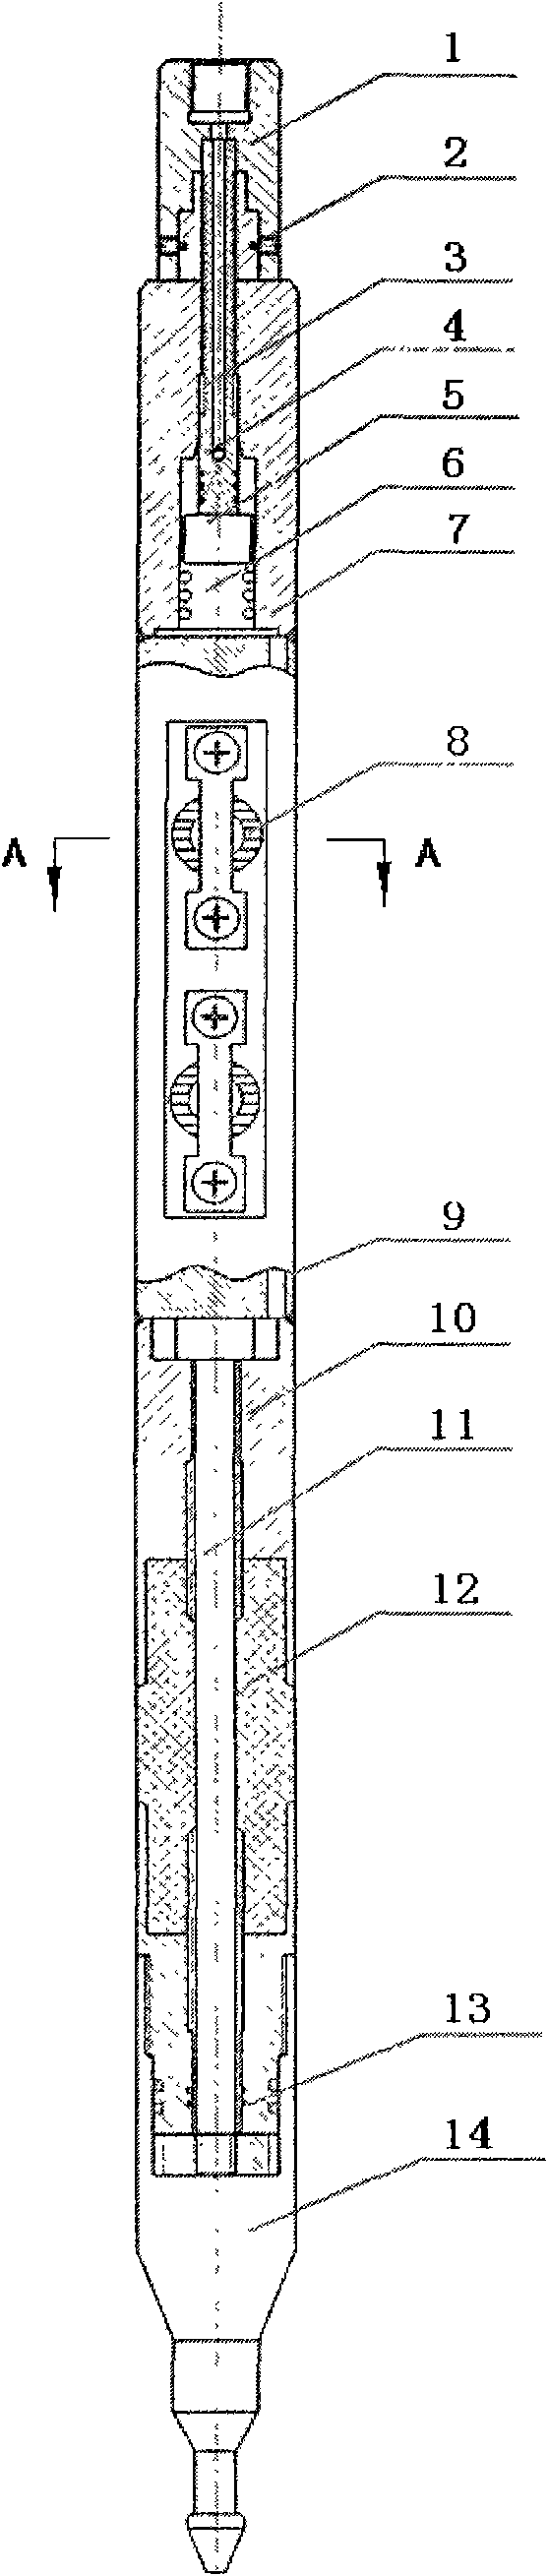 Oil tube testing plugging process and tube testing plugging device